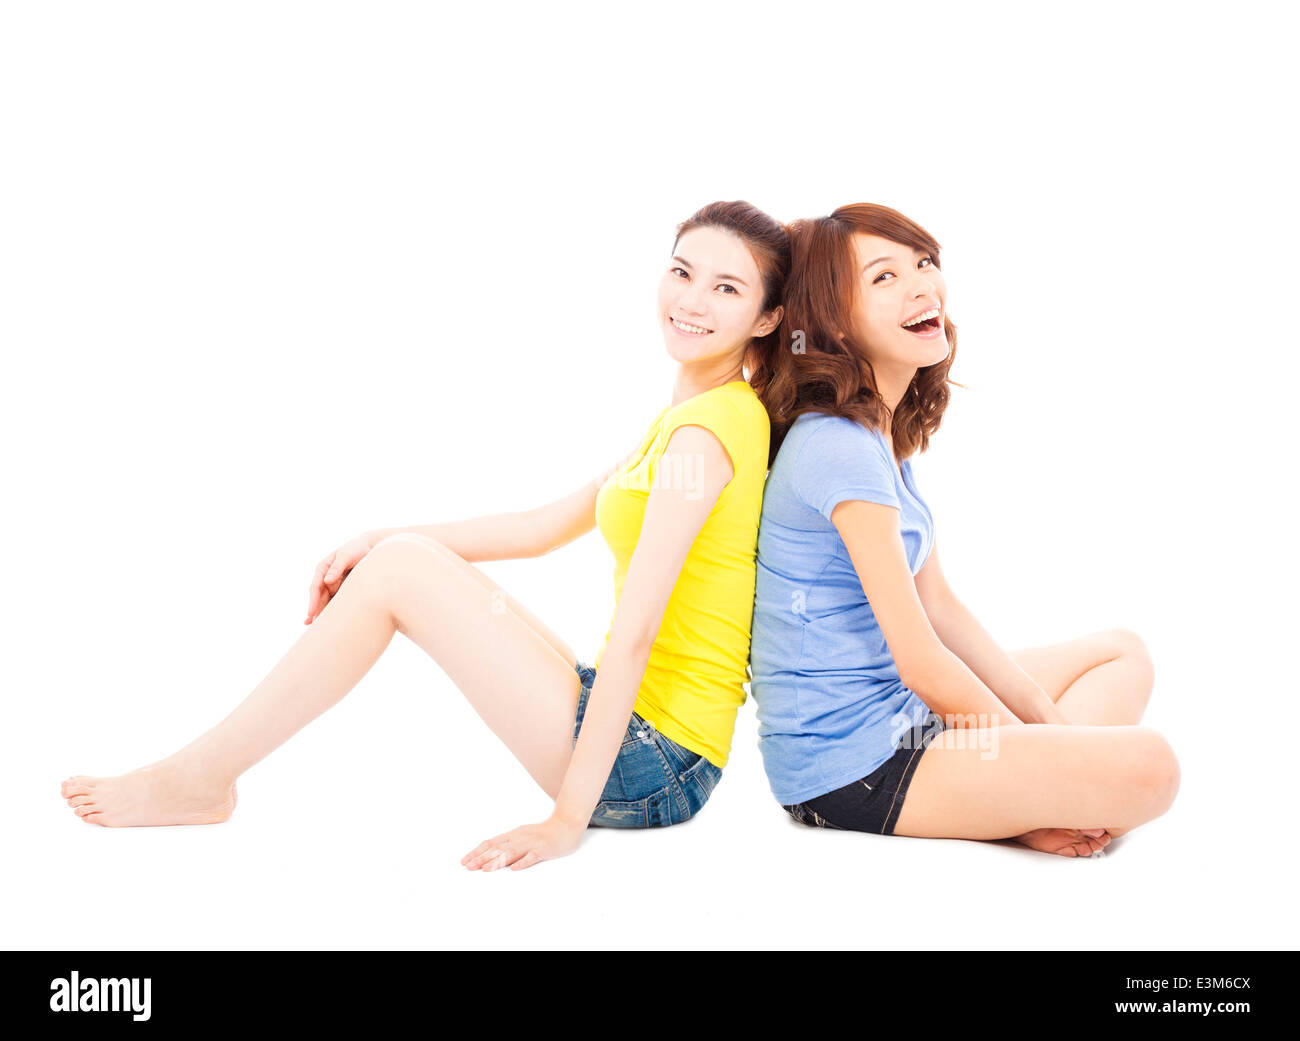 two smiling young woman sitting and back to back Stock Photo